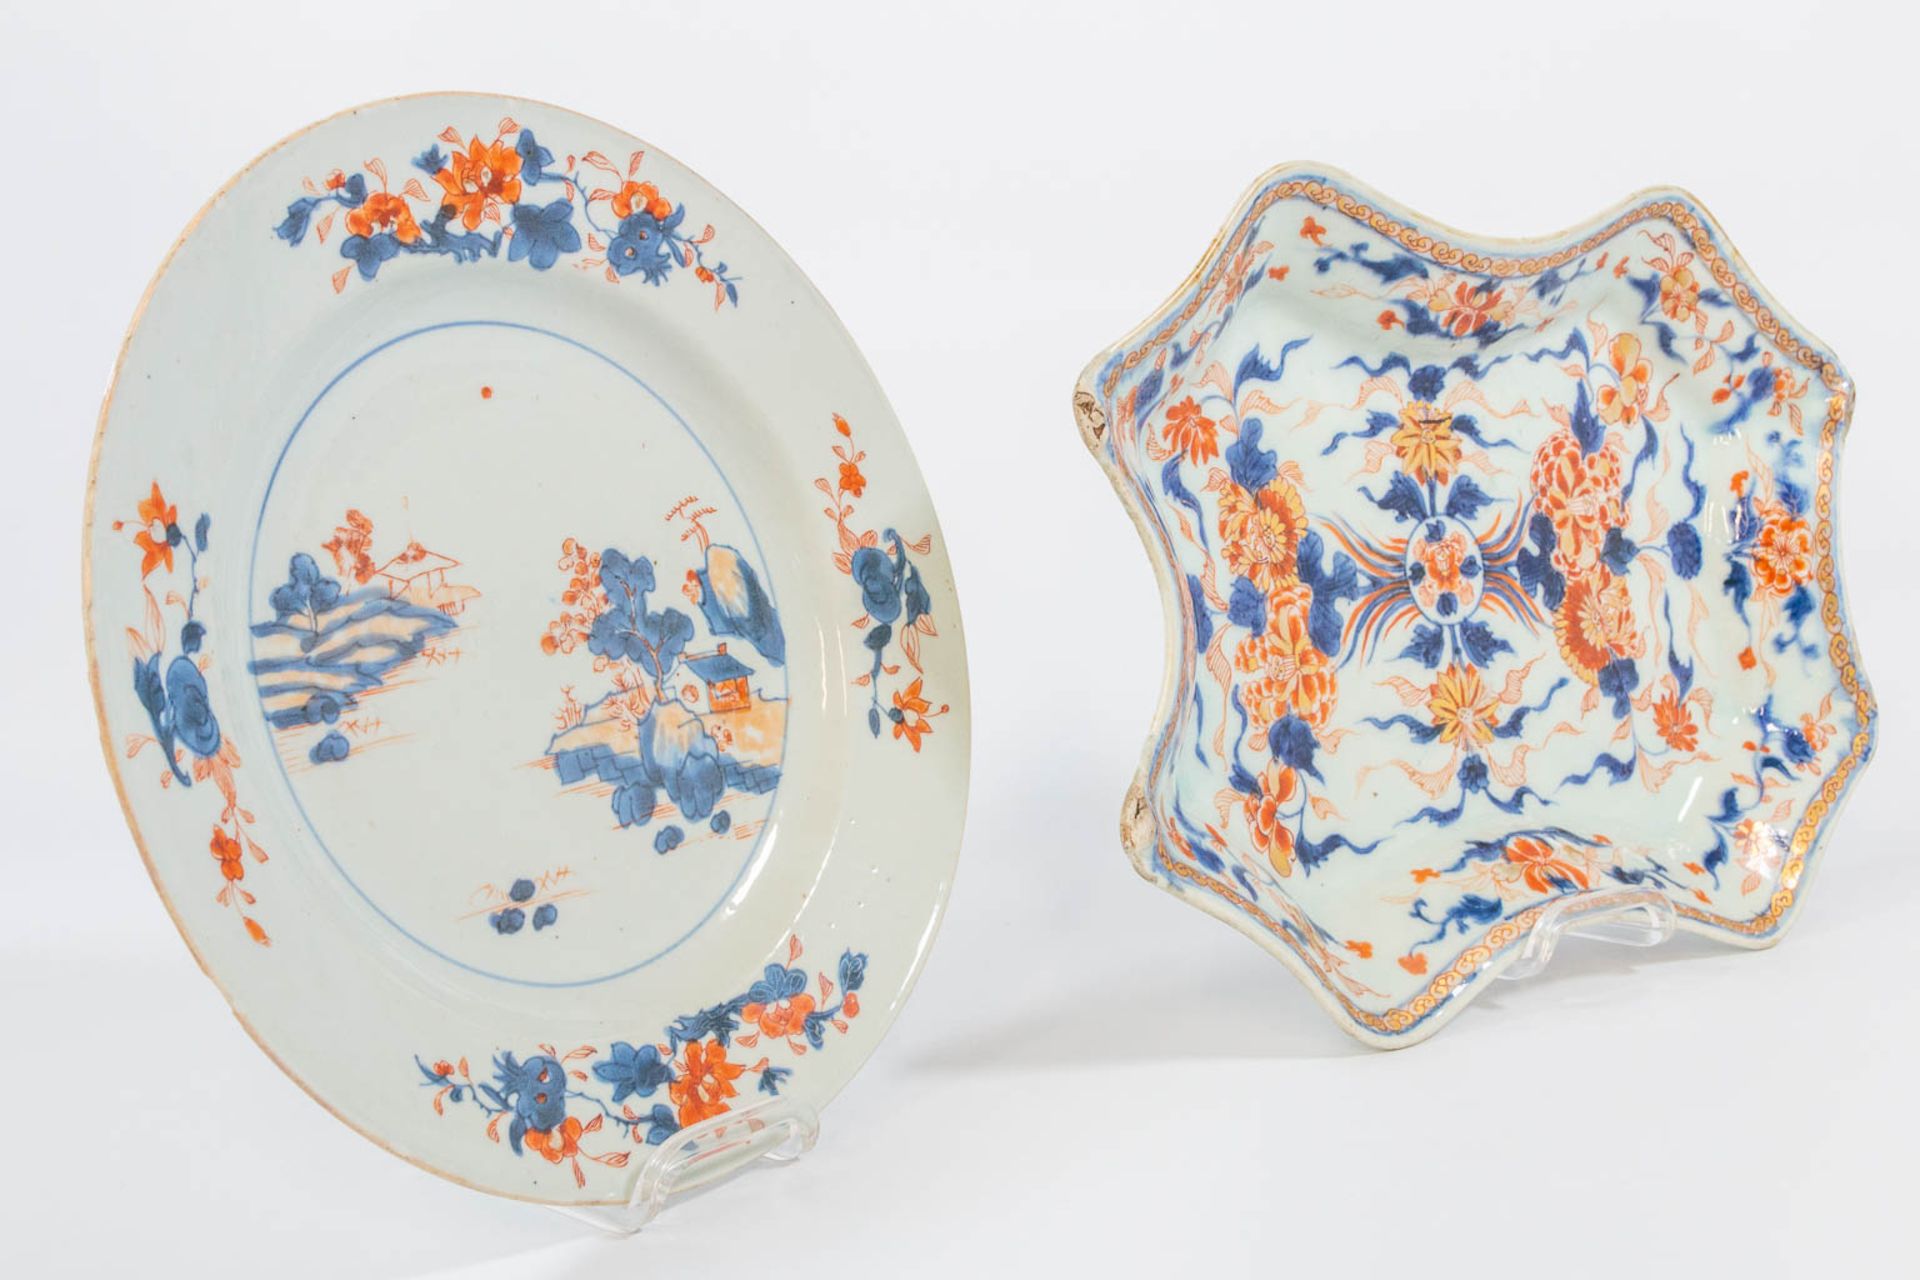 A collection of 6 famille rose objects and plates, made of porcelain. - Image 14 of 24